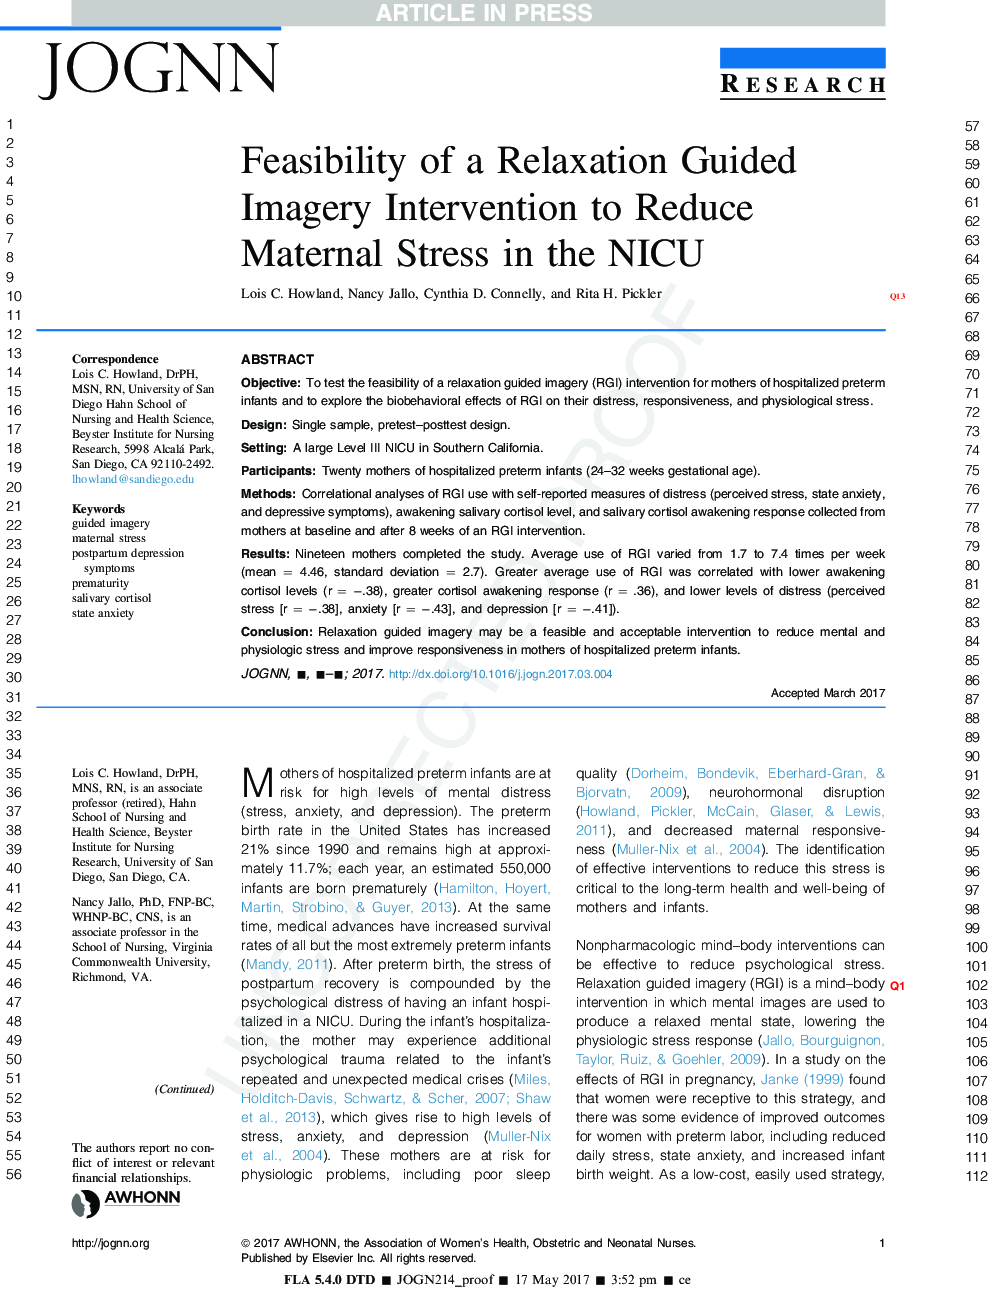 Feasibility of a Relaxation Guided Imagery Intervention to Reduce Maternal Stress in the NICU